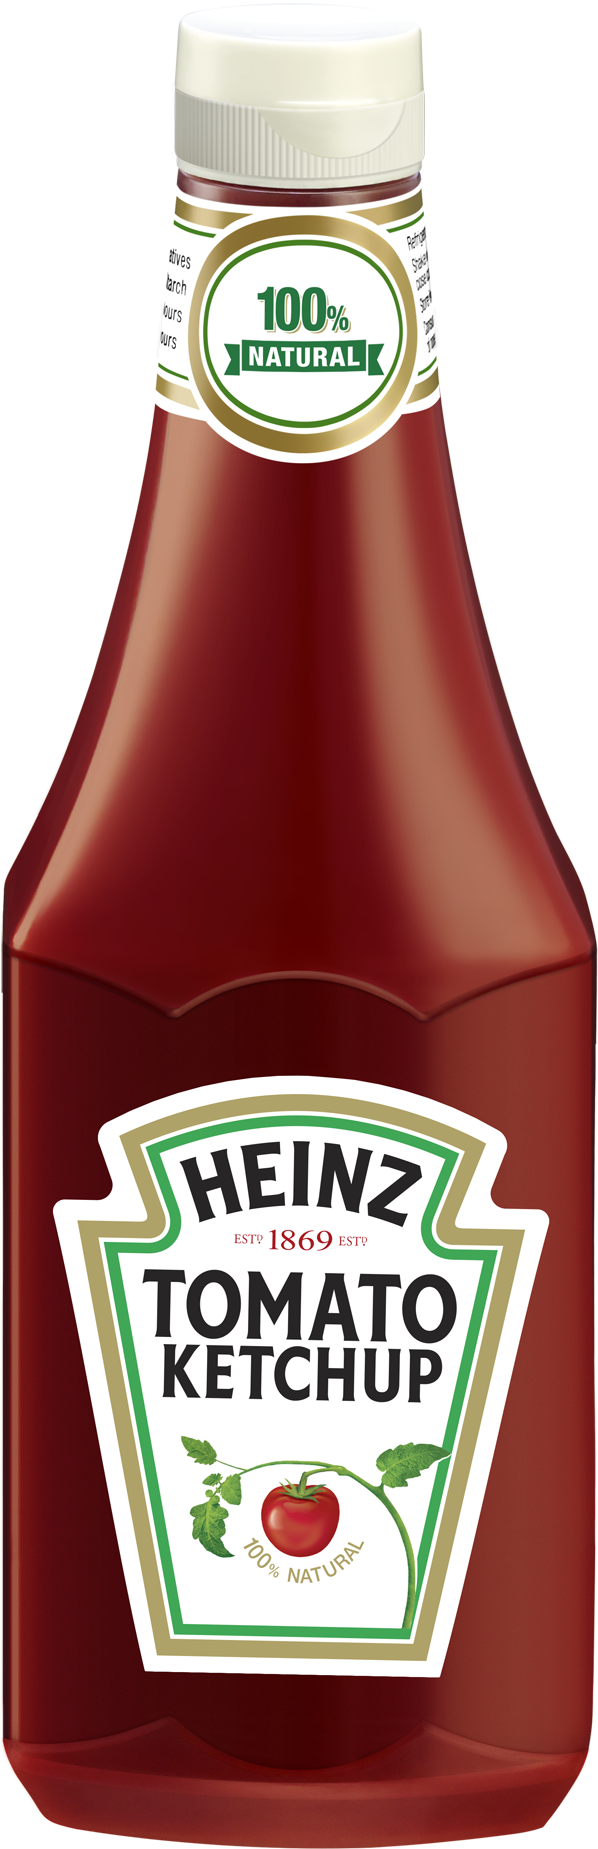 Heinz Natural Tomato Ketchup Bottle PNG image